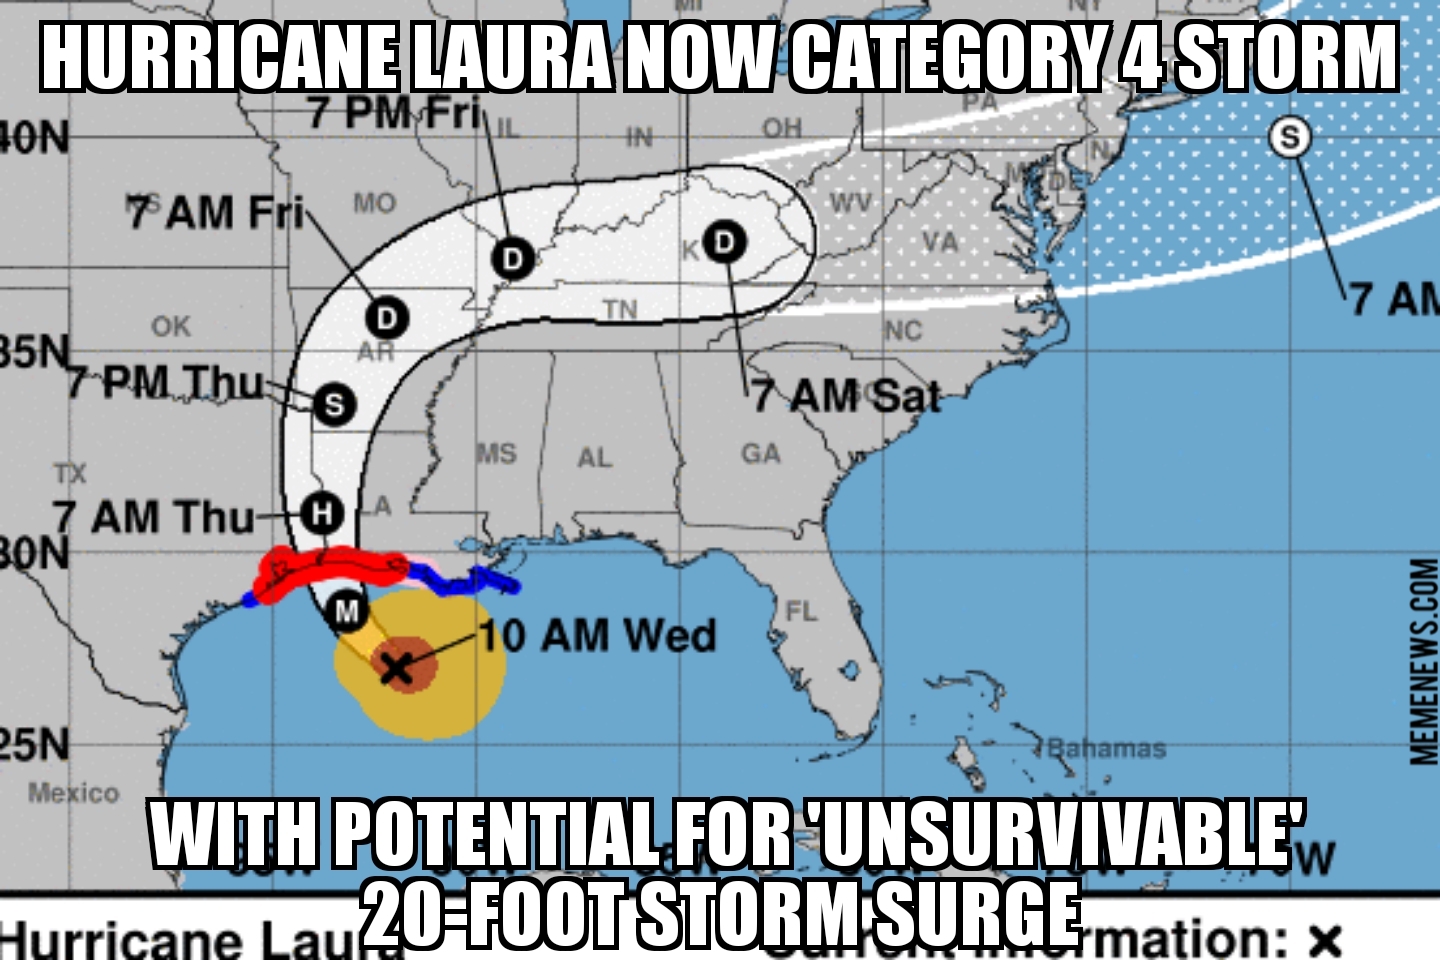 Hurricane Laura now category 4